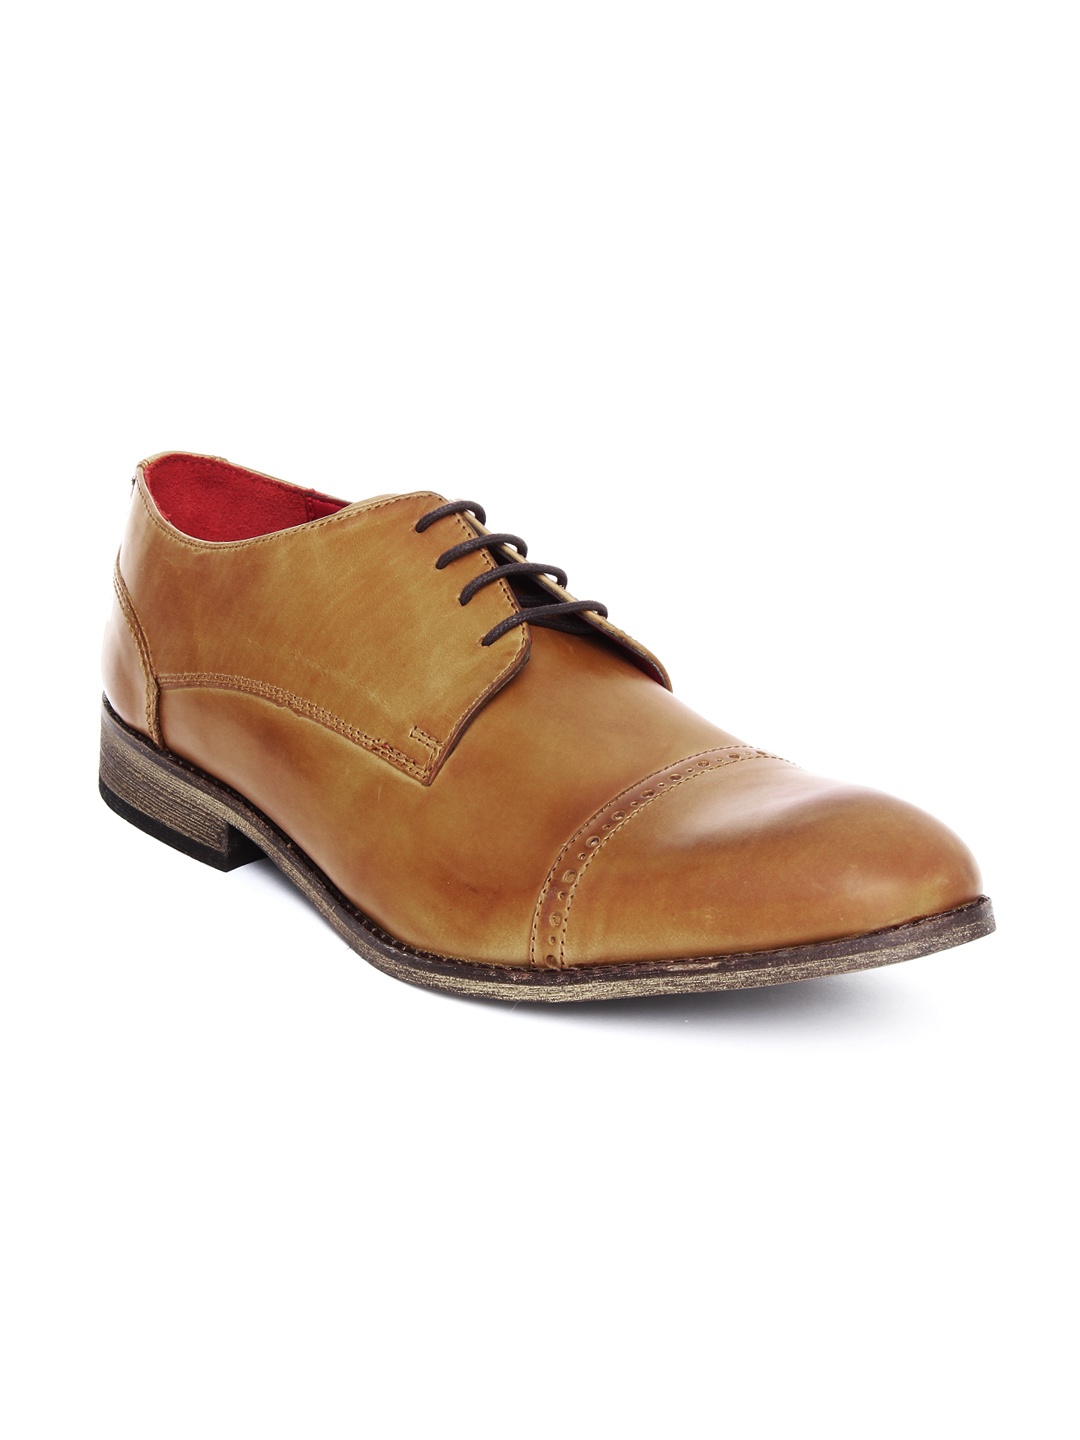 New Look Men Brown Leather Derby Shoes at Myntra